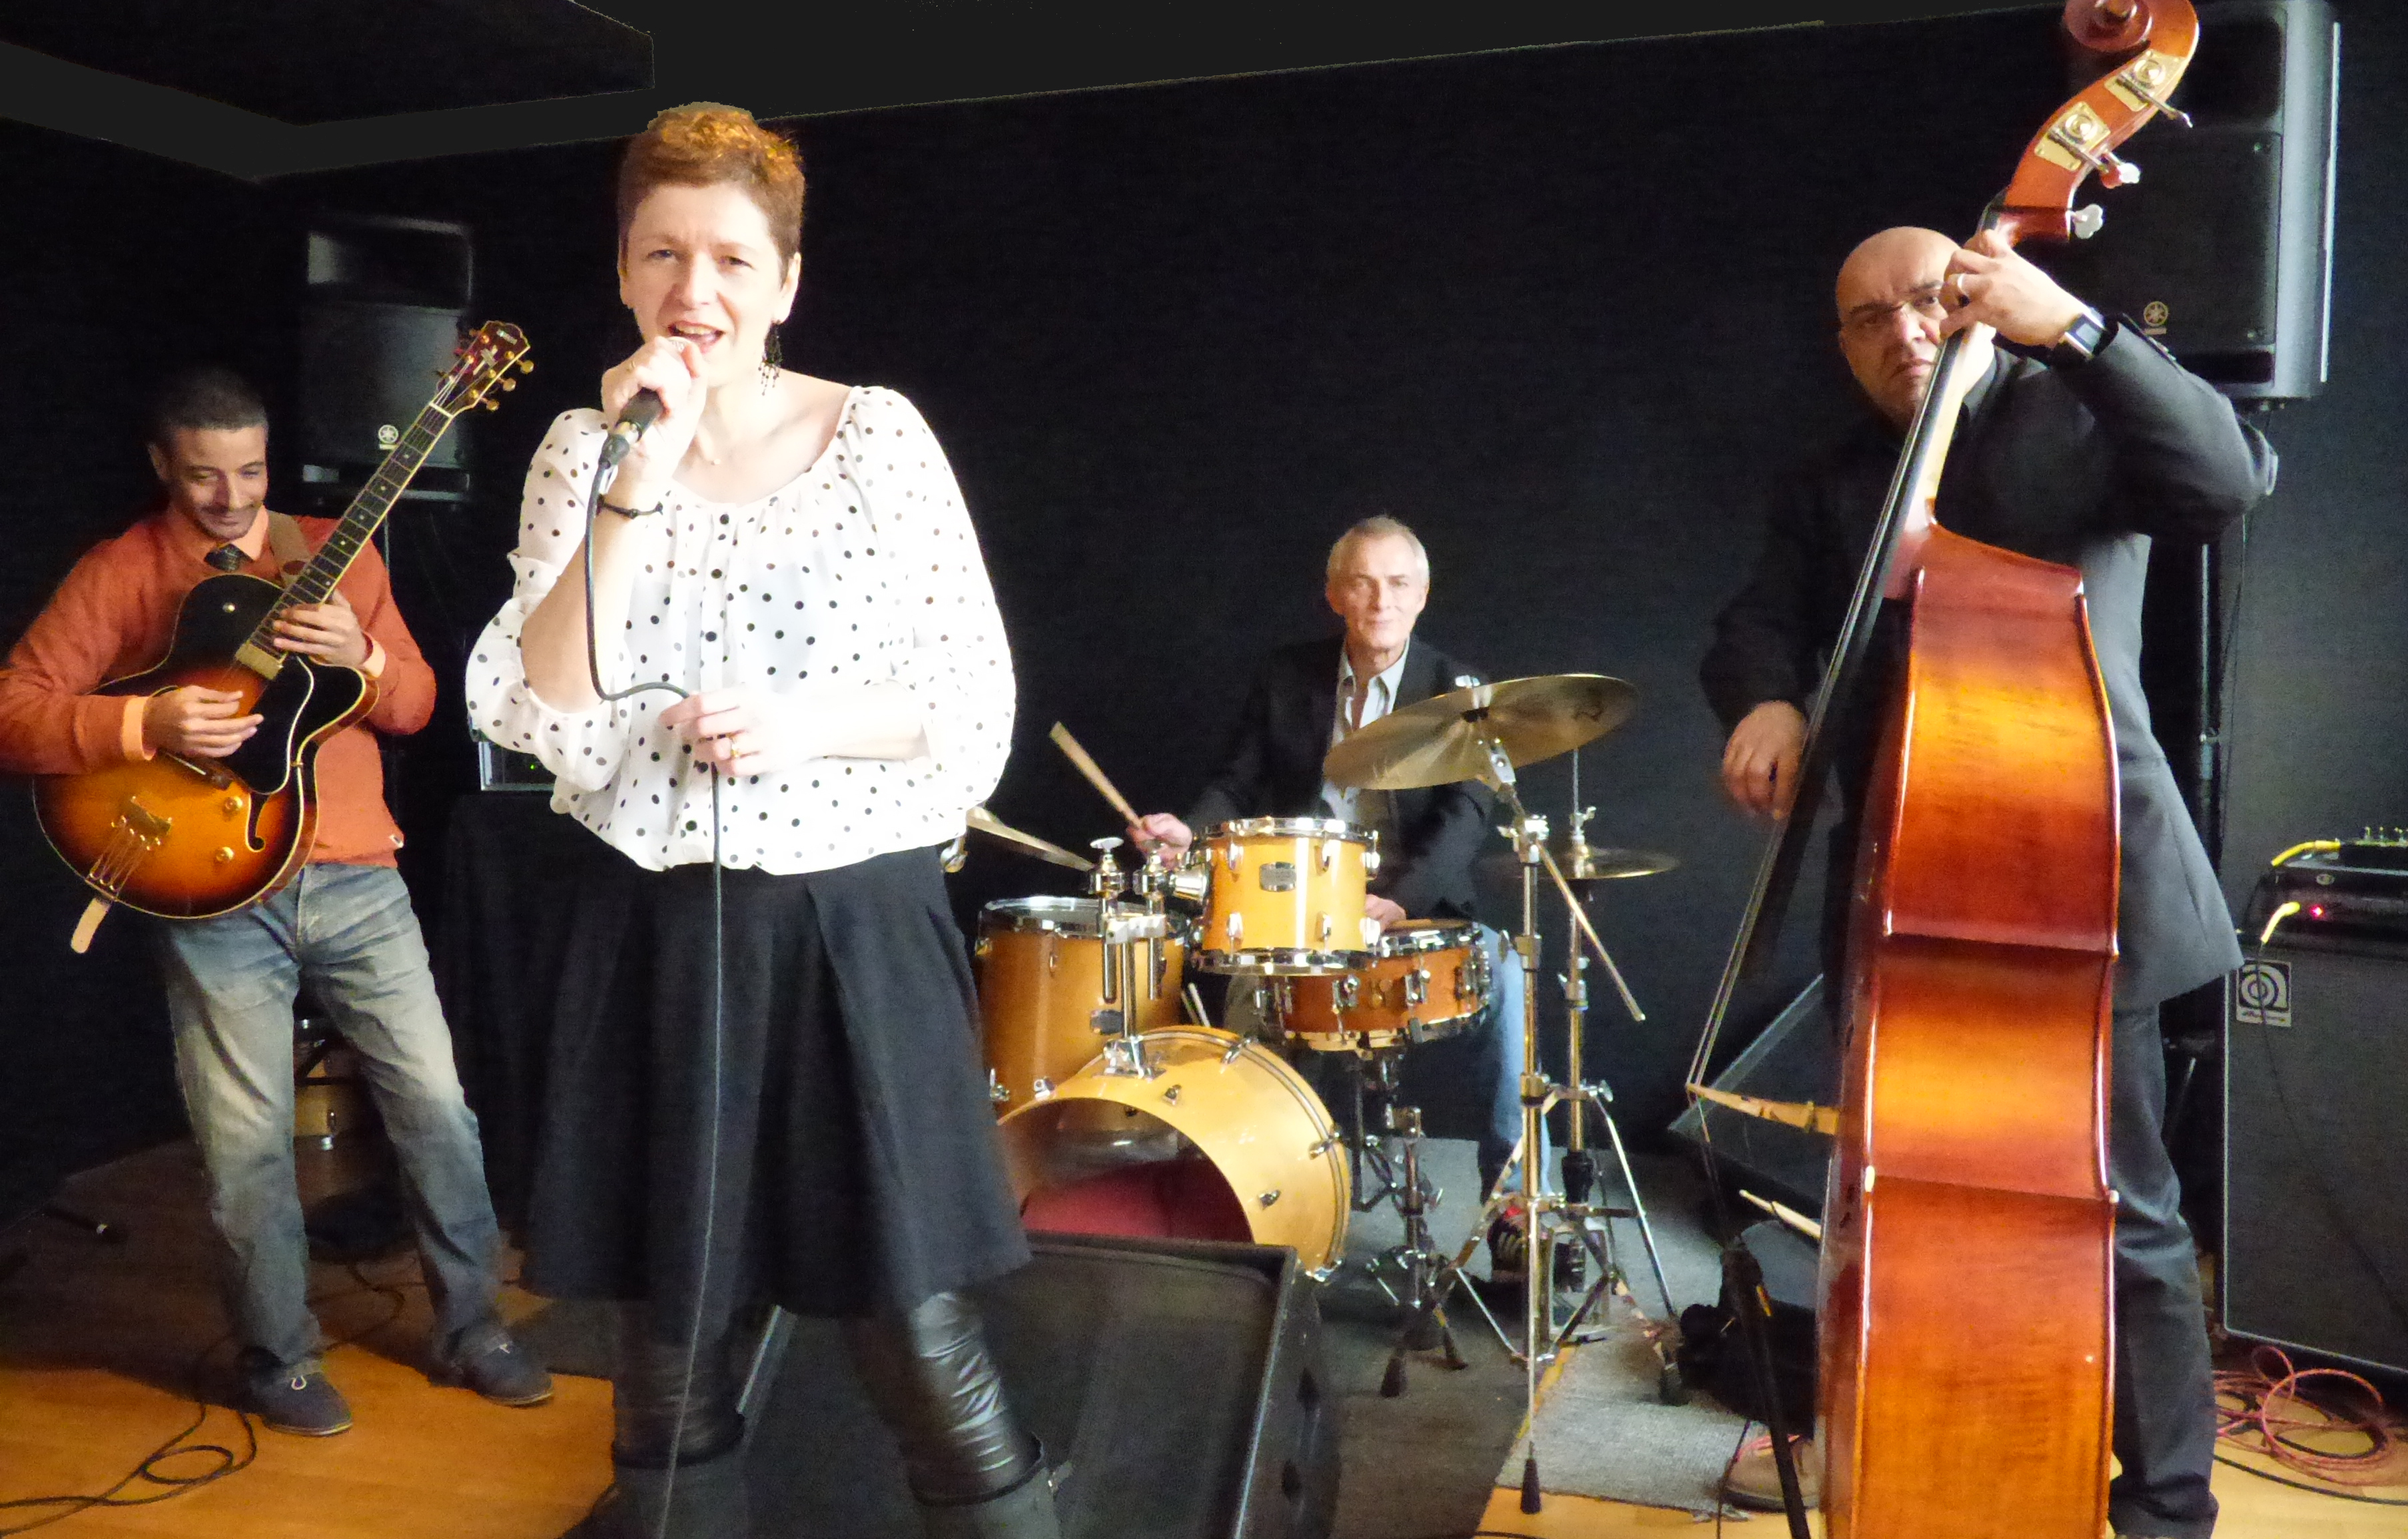 Claire and the Cool Club, jazz, pop, gig, song, paris, melun, guitar, bass, drum, live, concert